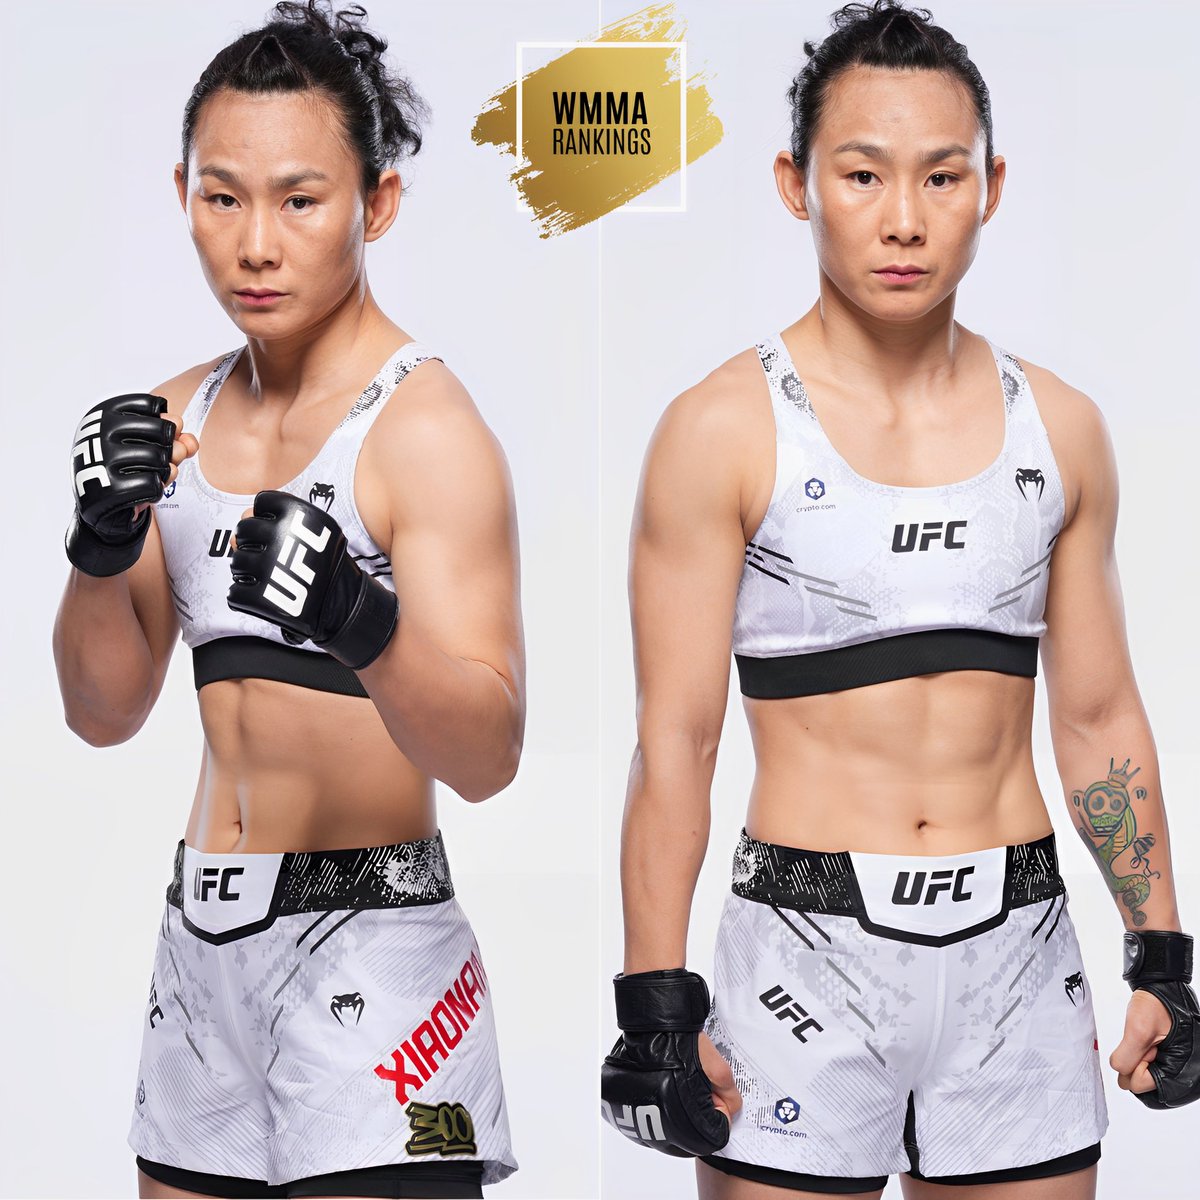 📸 A determined challenger! The #1 ranked strawweight contender 🇨🇳 Yan Xiaonan in her fresh UFC fighter portrait shots. Don’t miss the #UFC300 PPV main card this Saturday as she faces compatriot Zhang Weili for the UFC strawweight title in an epic all-China clash. 🥊 #WMMA #UFC